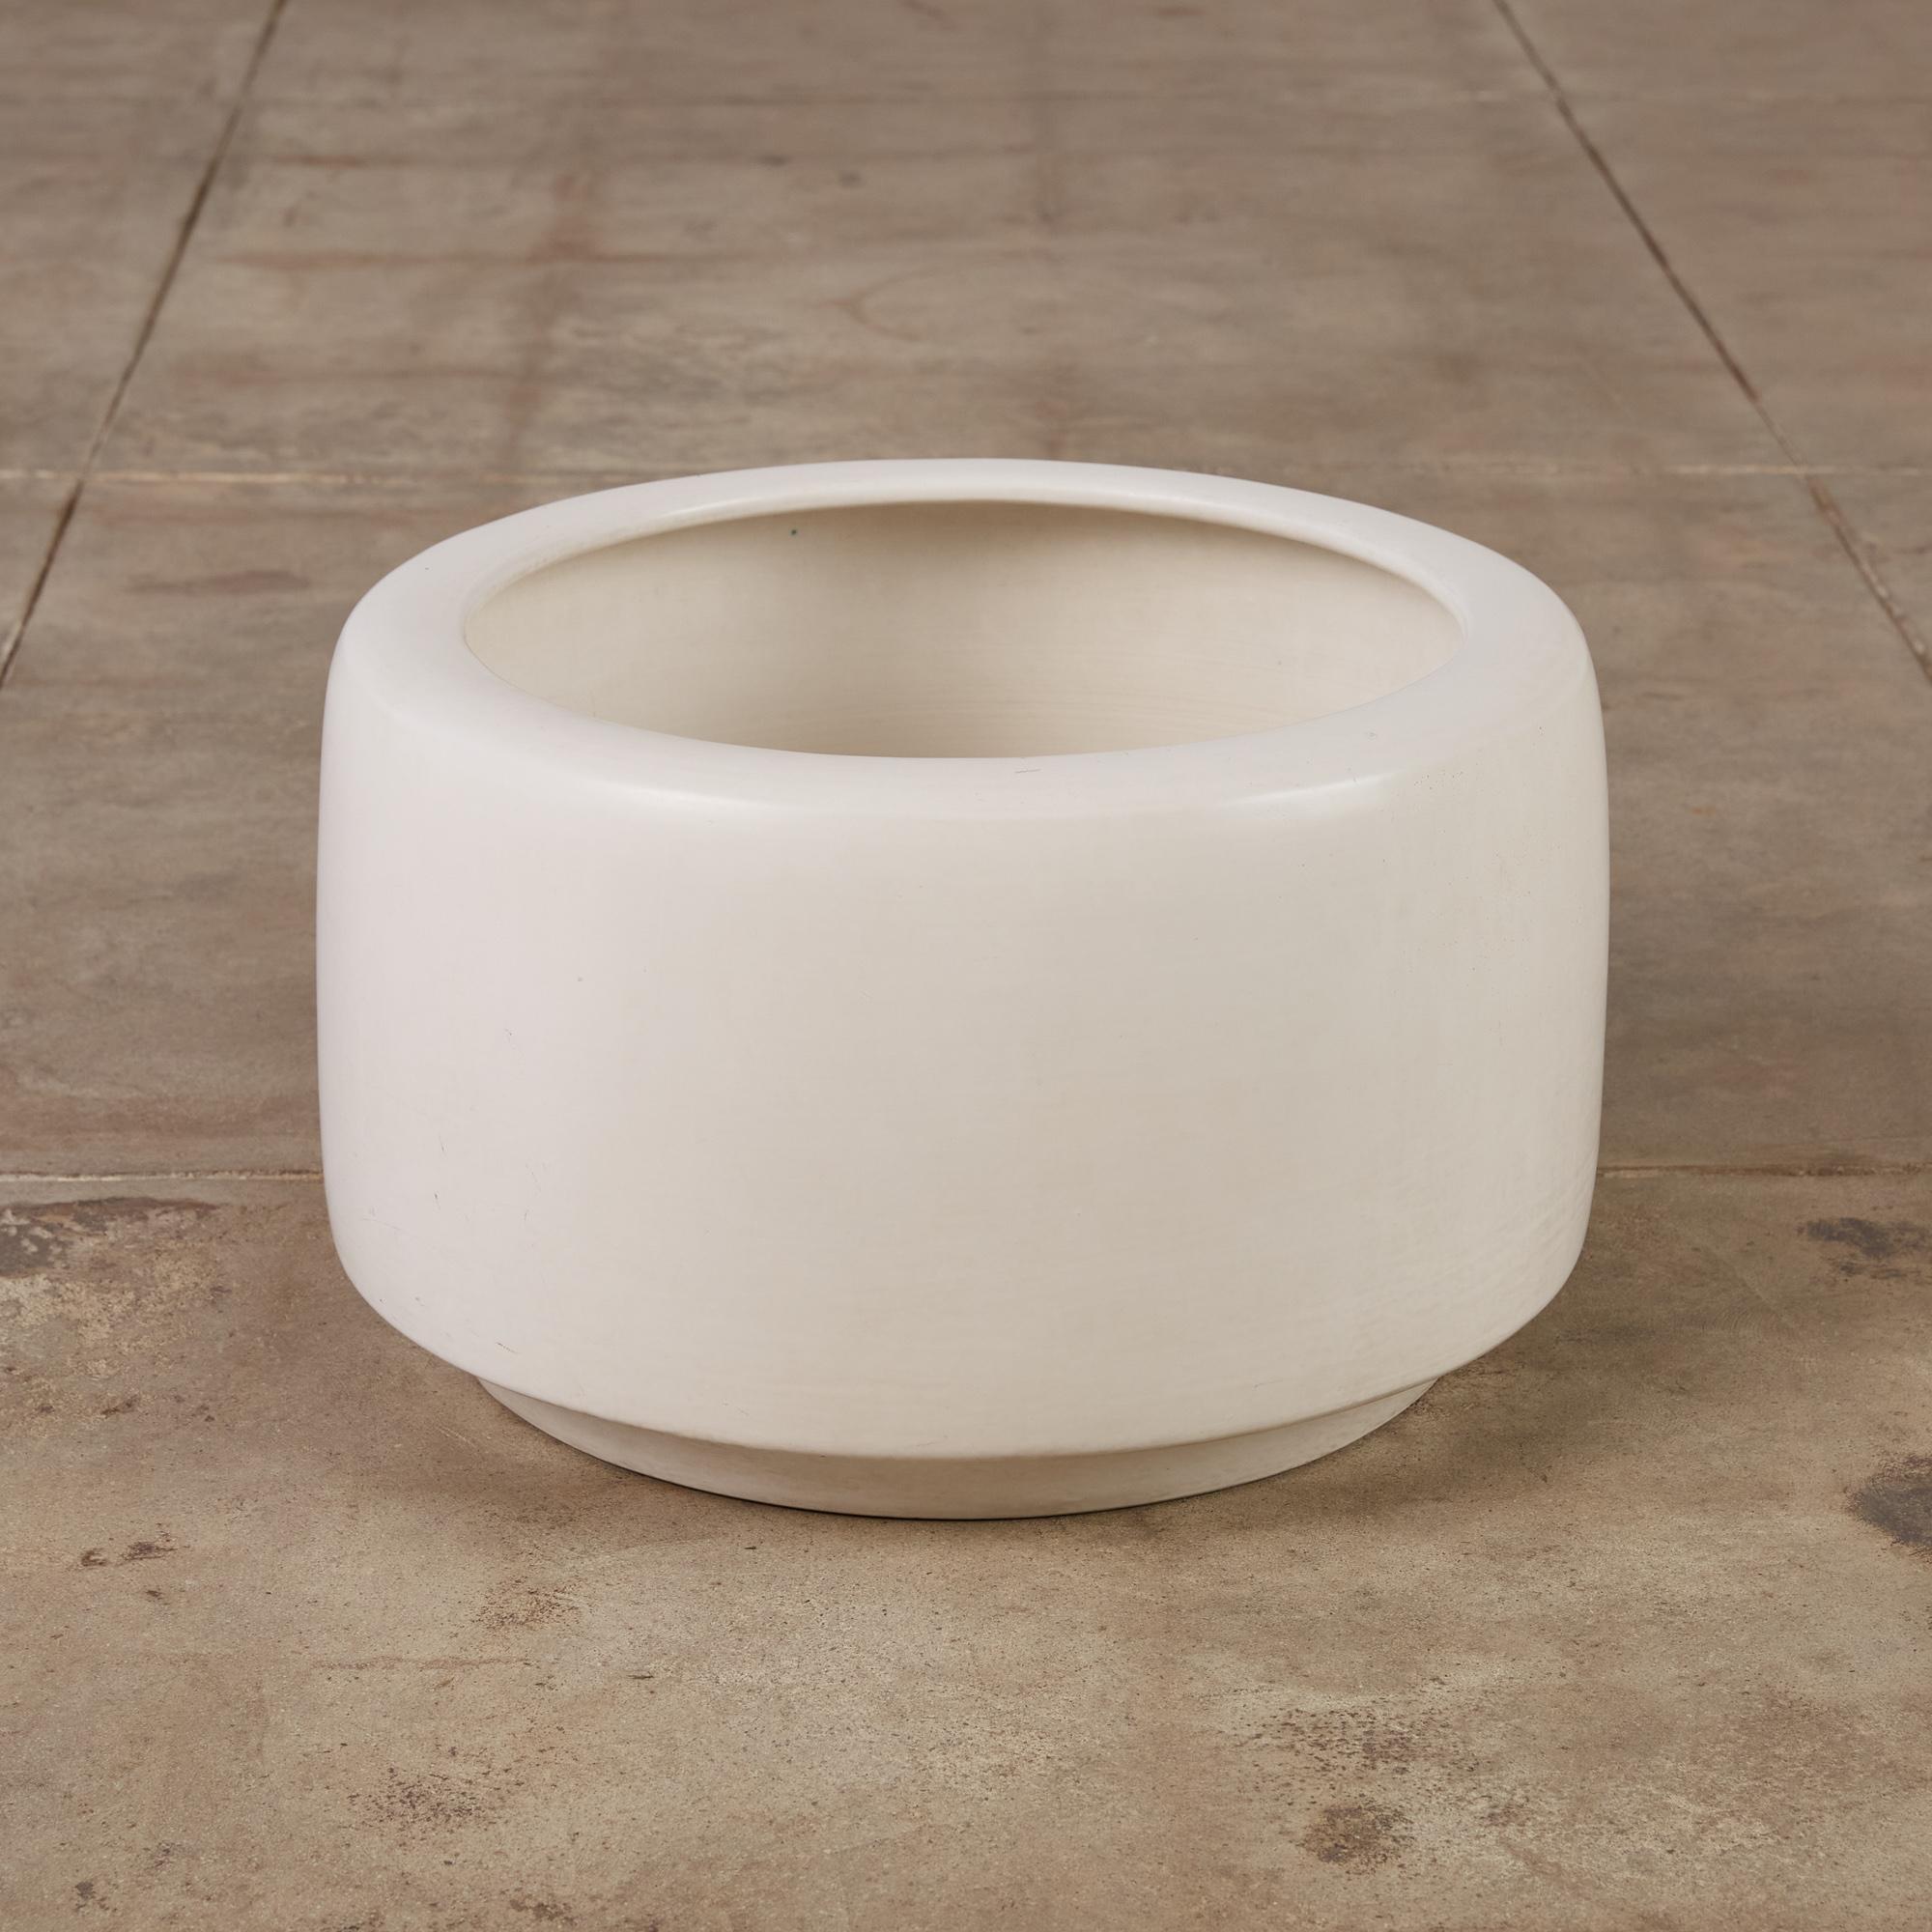 20th Century White-Glazed CP-17 Tire Planter by John Follis for Architectural Pottery